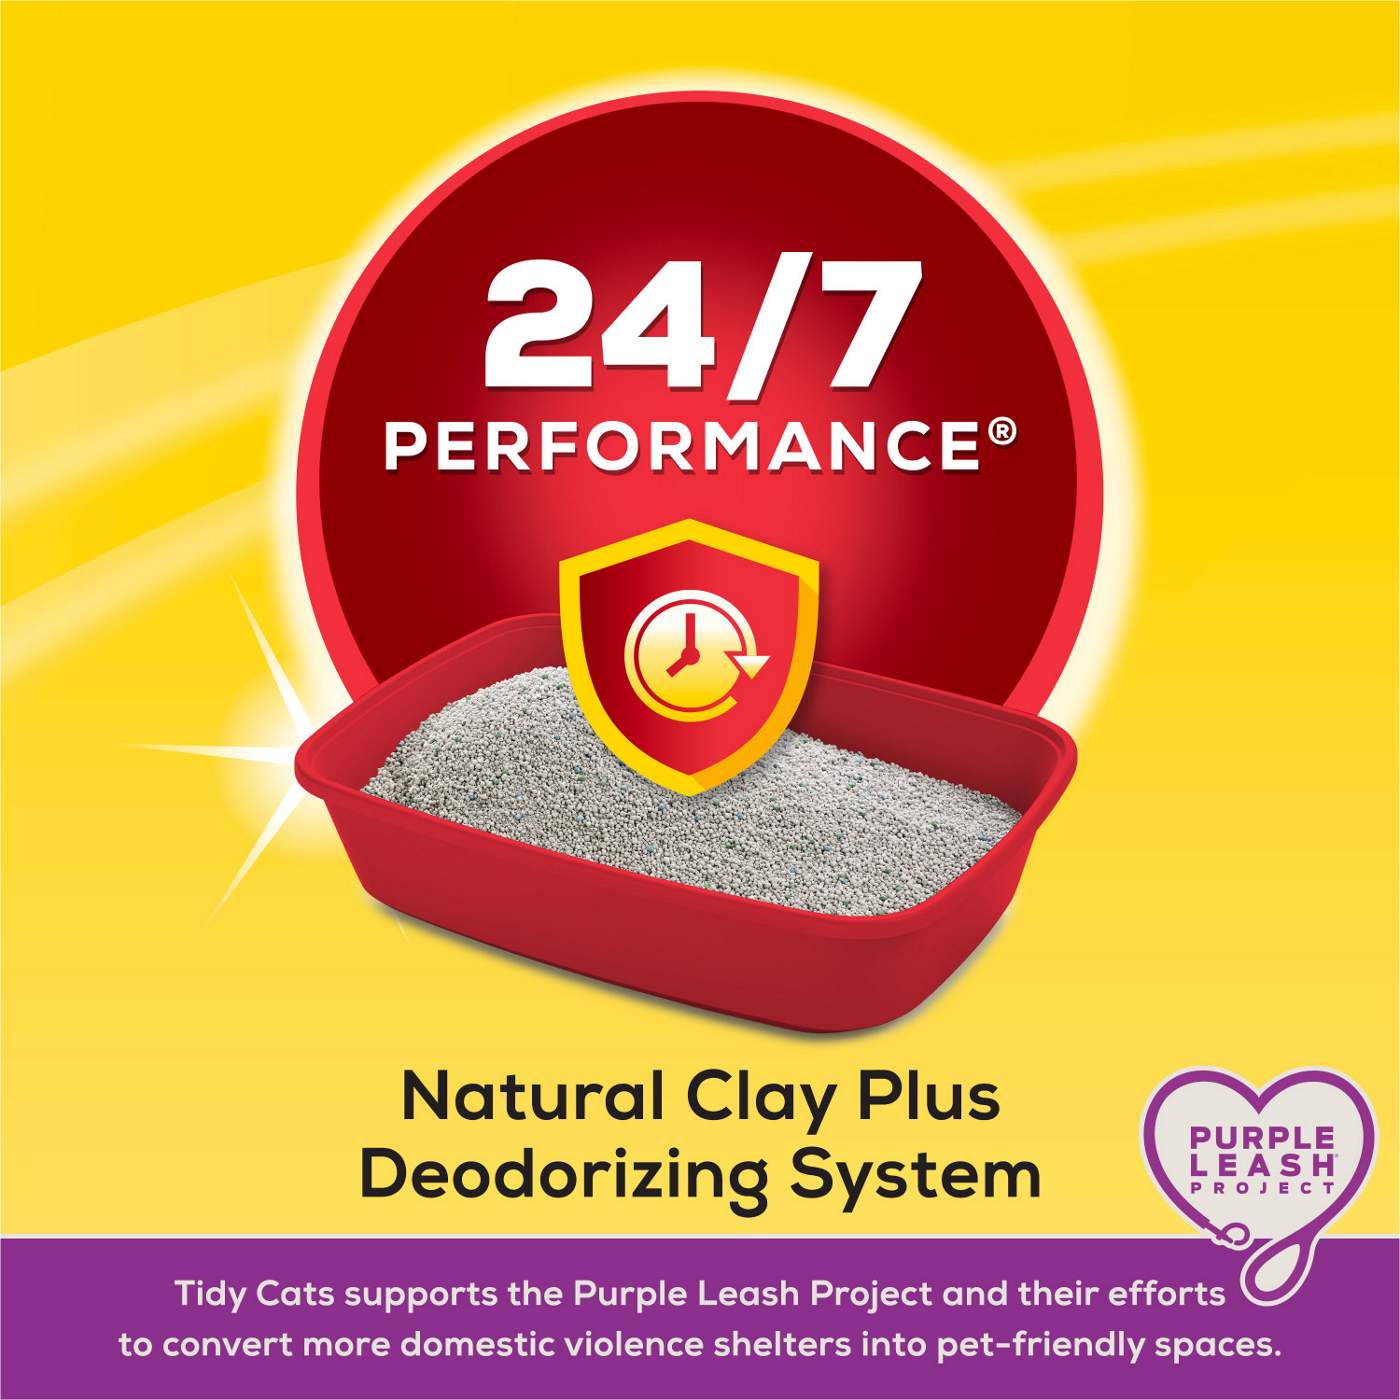 Tidy Cats Purina Tidy Cats Clumping Cat Litter, 24/7 Performance Multi Cat Litter; image 2 of 4